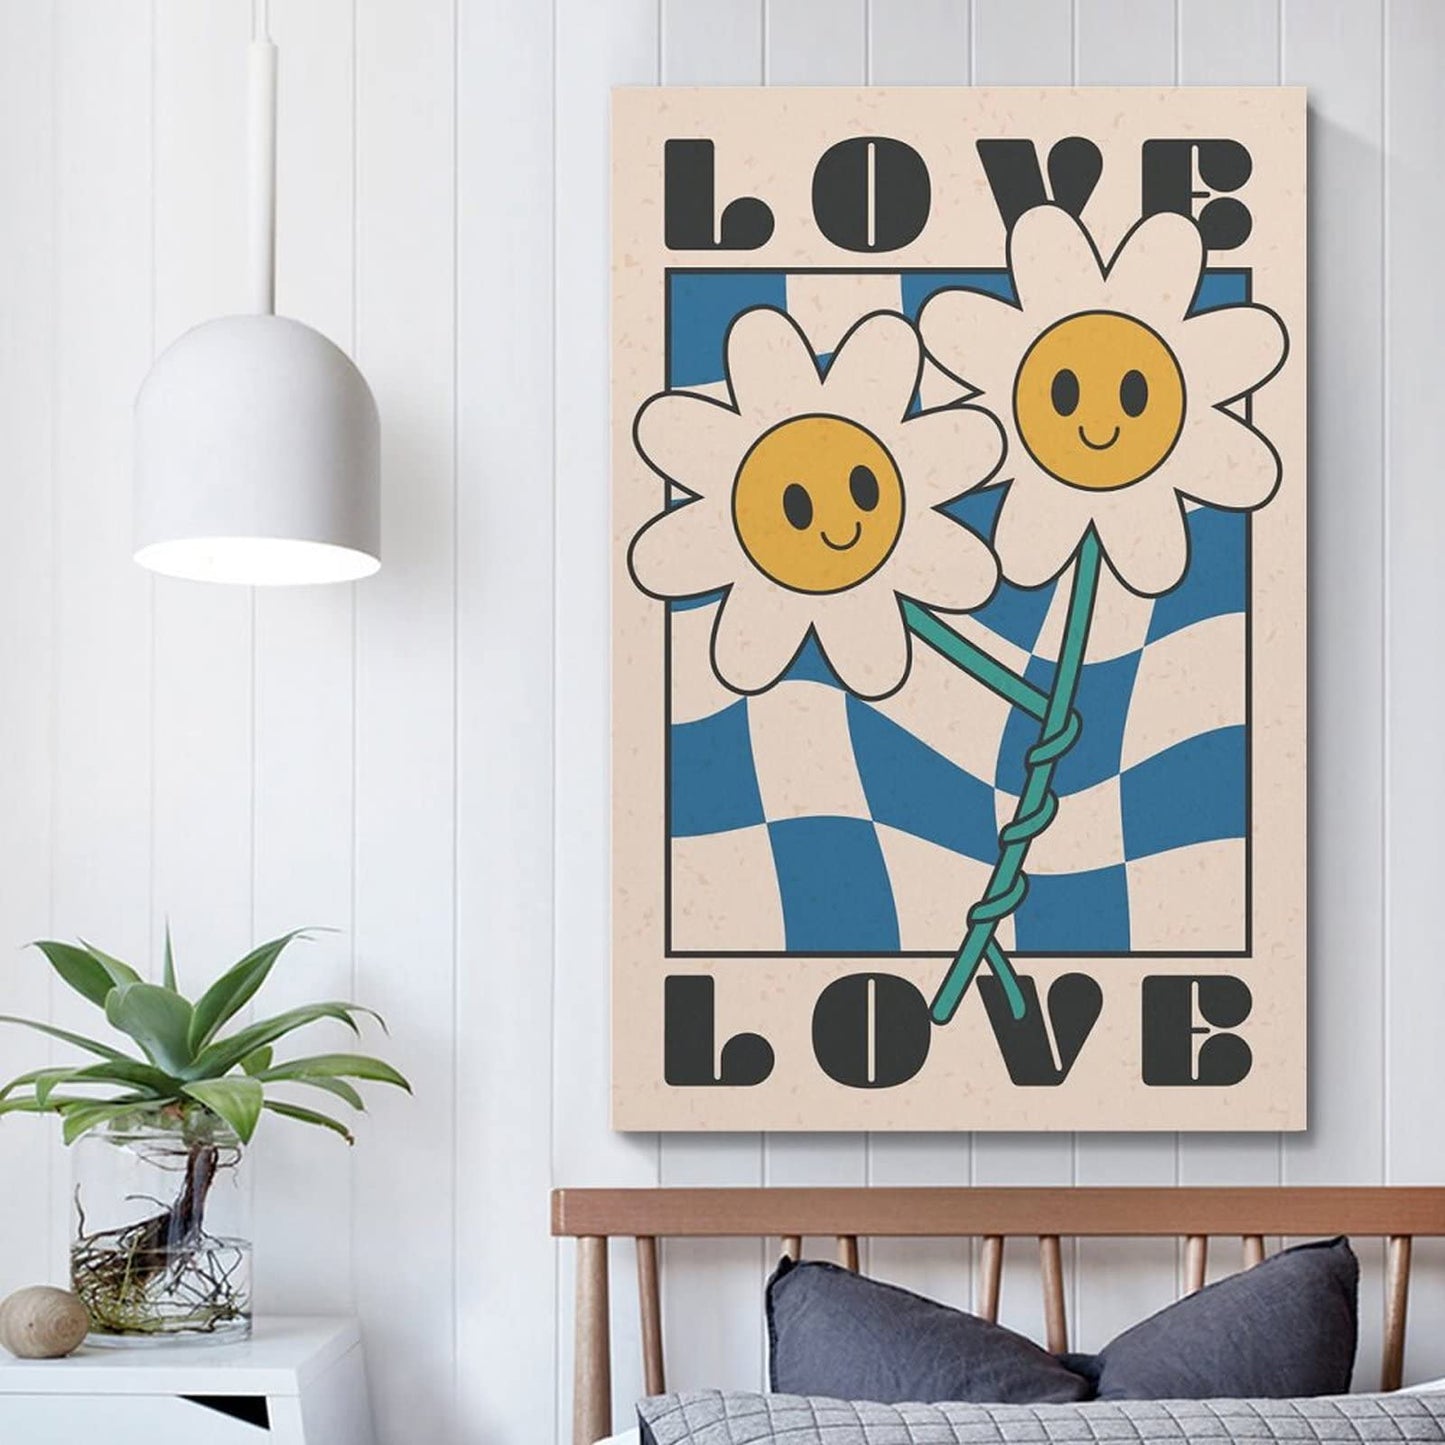 Smile Flower Poster Vintage Posters Retro Aesthetic Room Decor Poster Decorative Painting Canvas Wall Art Living Room Posters Bedroom Painting 12x18inch(30x45cm)